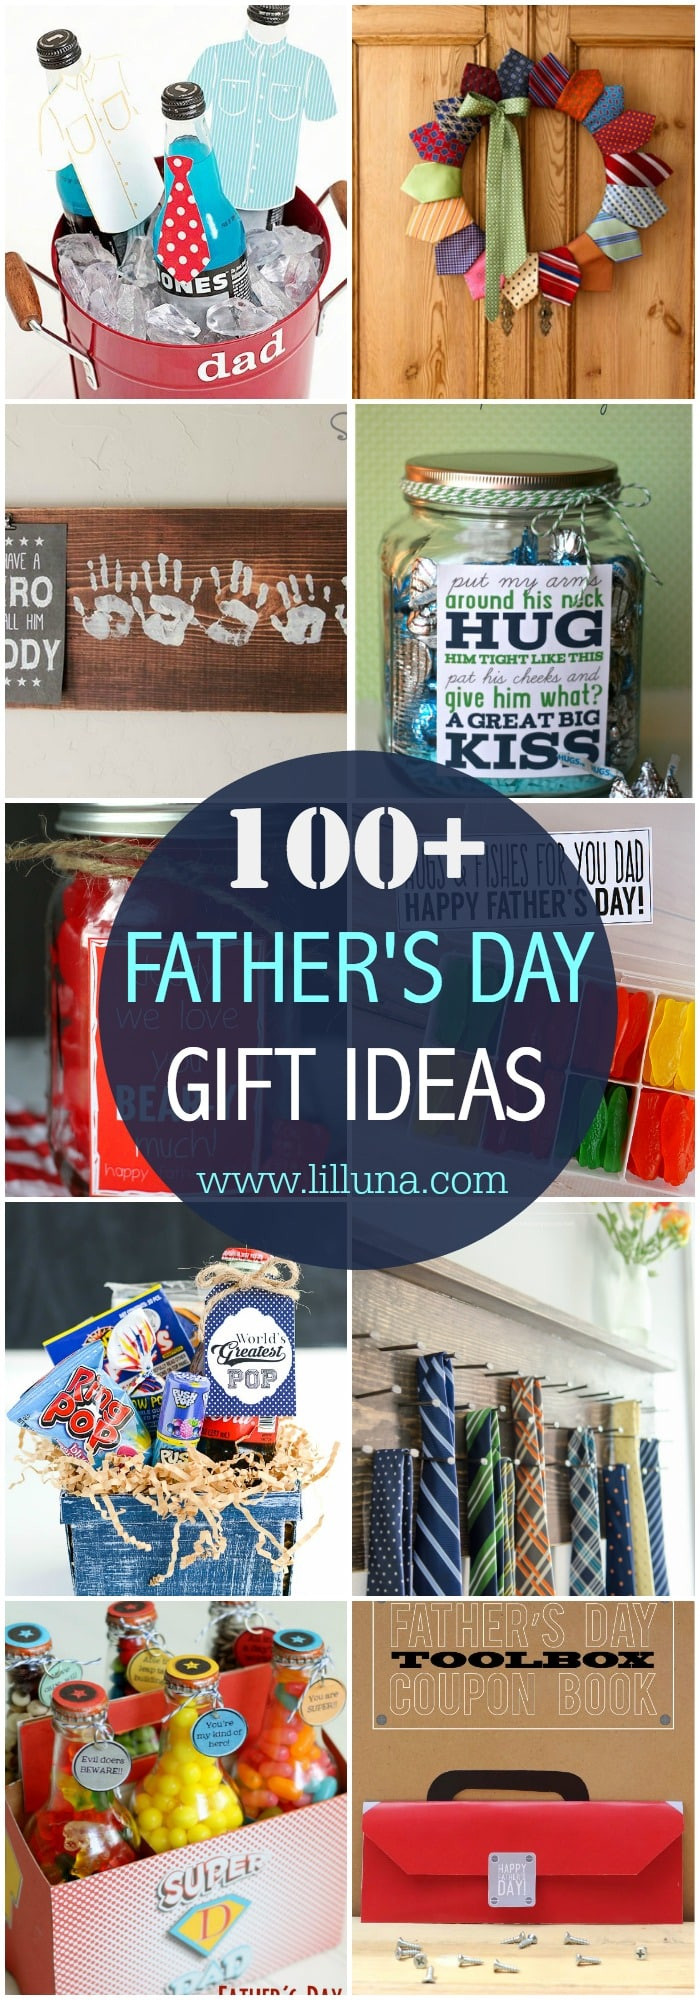 DIY Fathers Day Gift Ideas
 100 DIY Father s Day Gifts